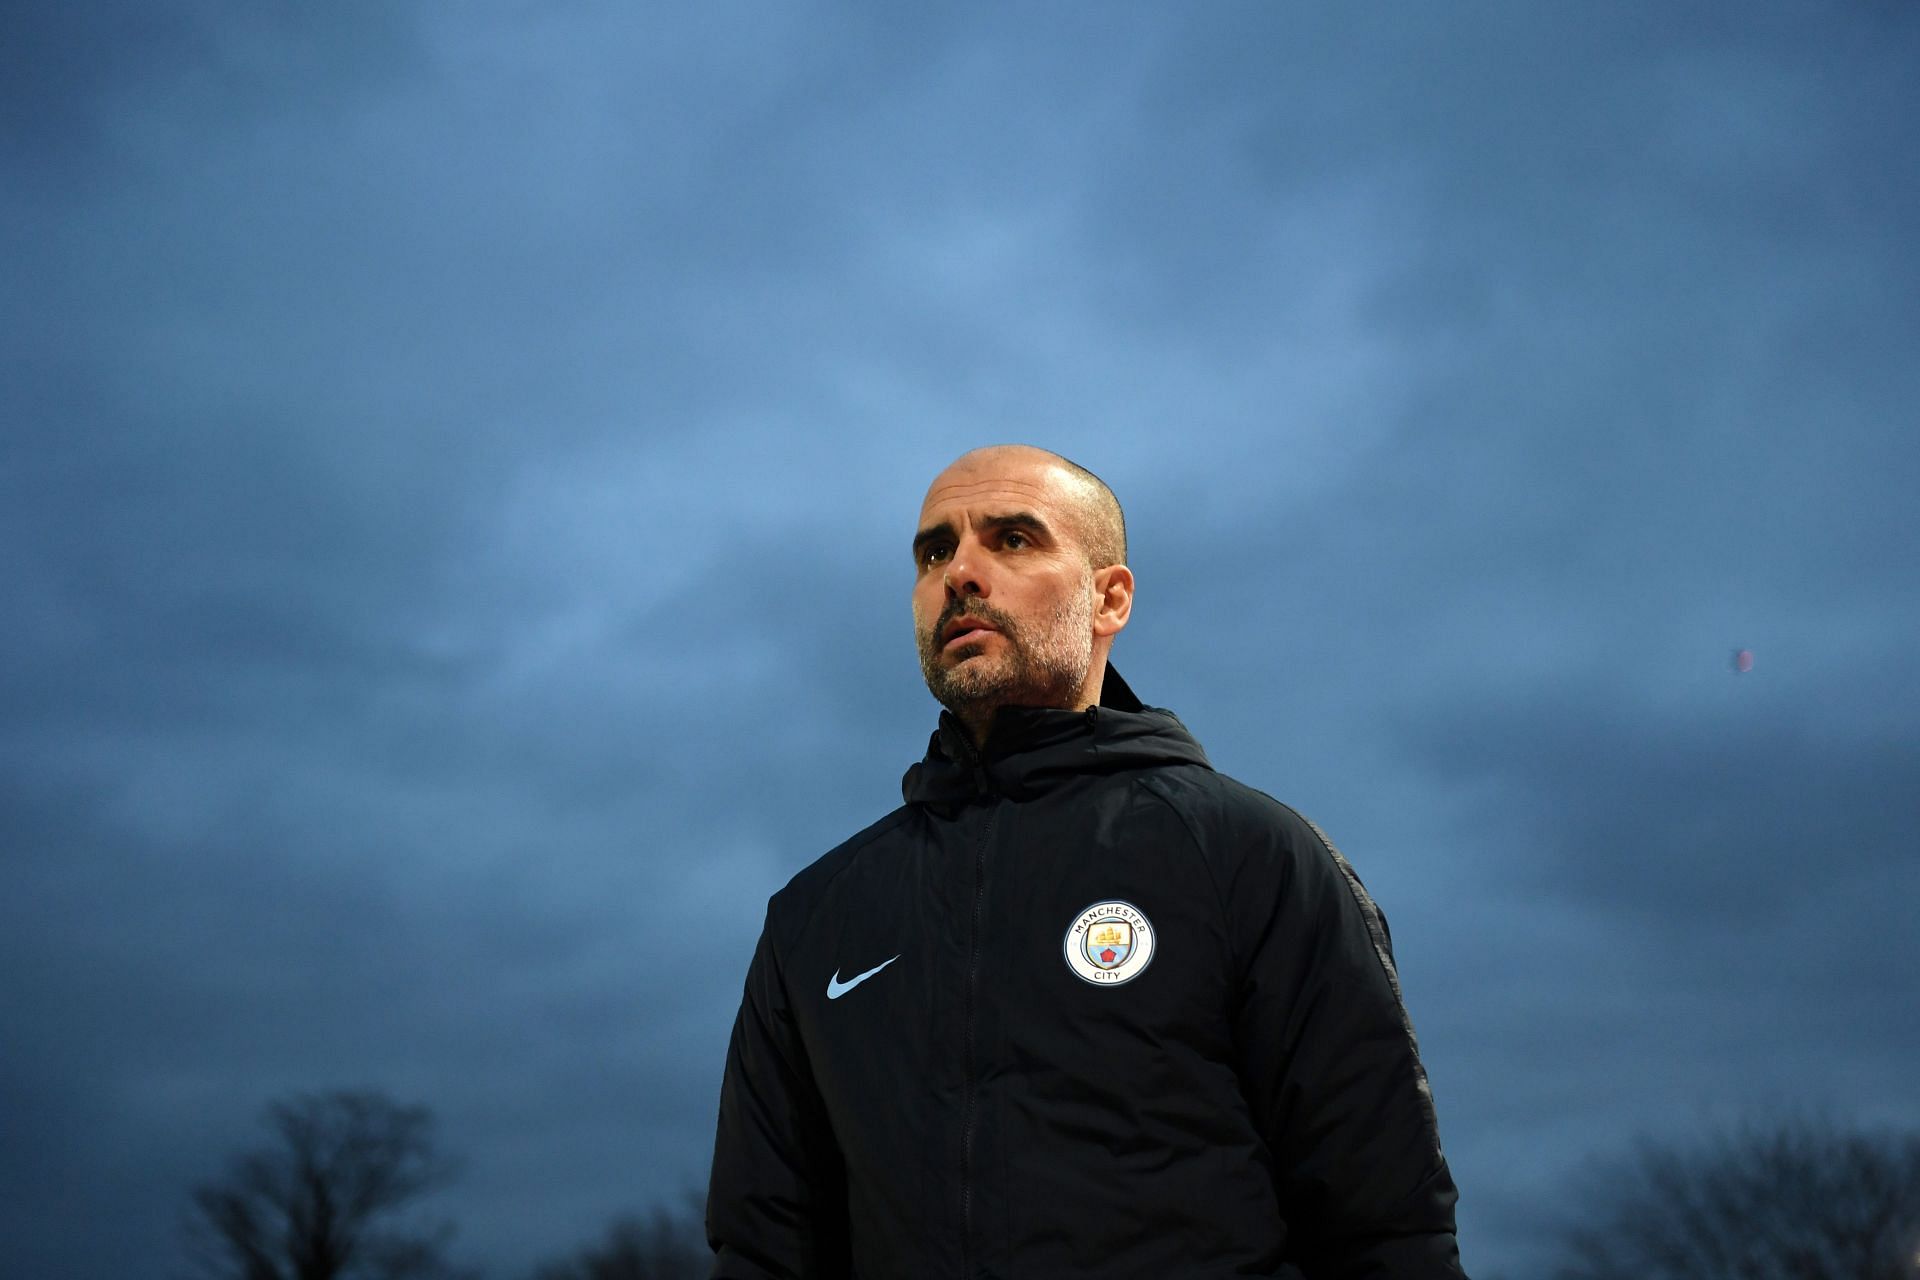 Pep Guardiola has achieved success at all the clubs he has managed so far